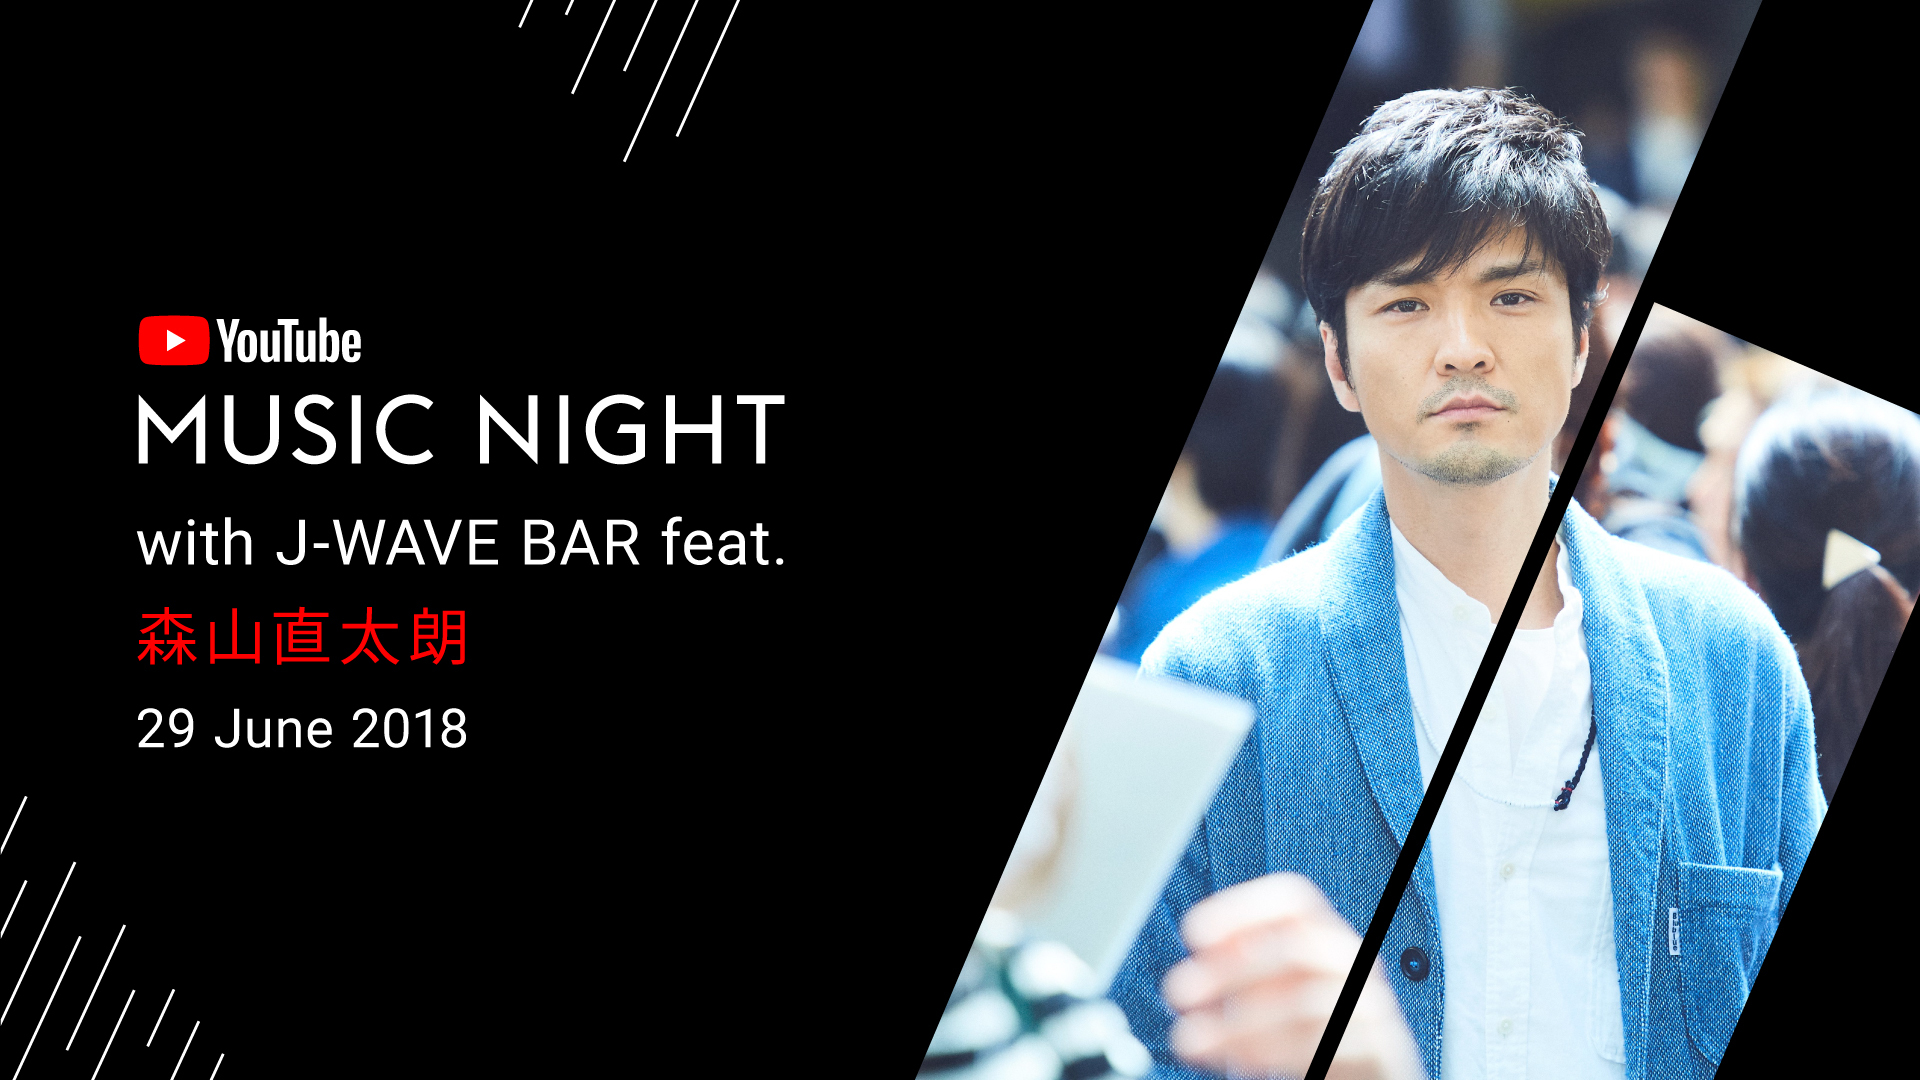 『YouTube Music Night with J-WAVE BAR』